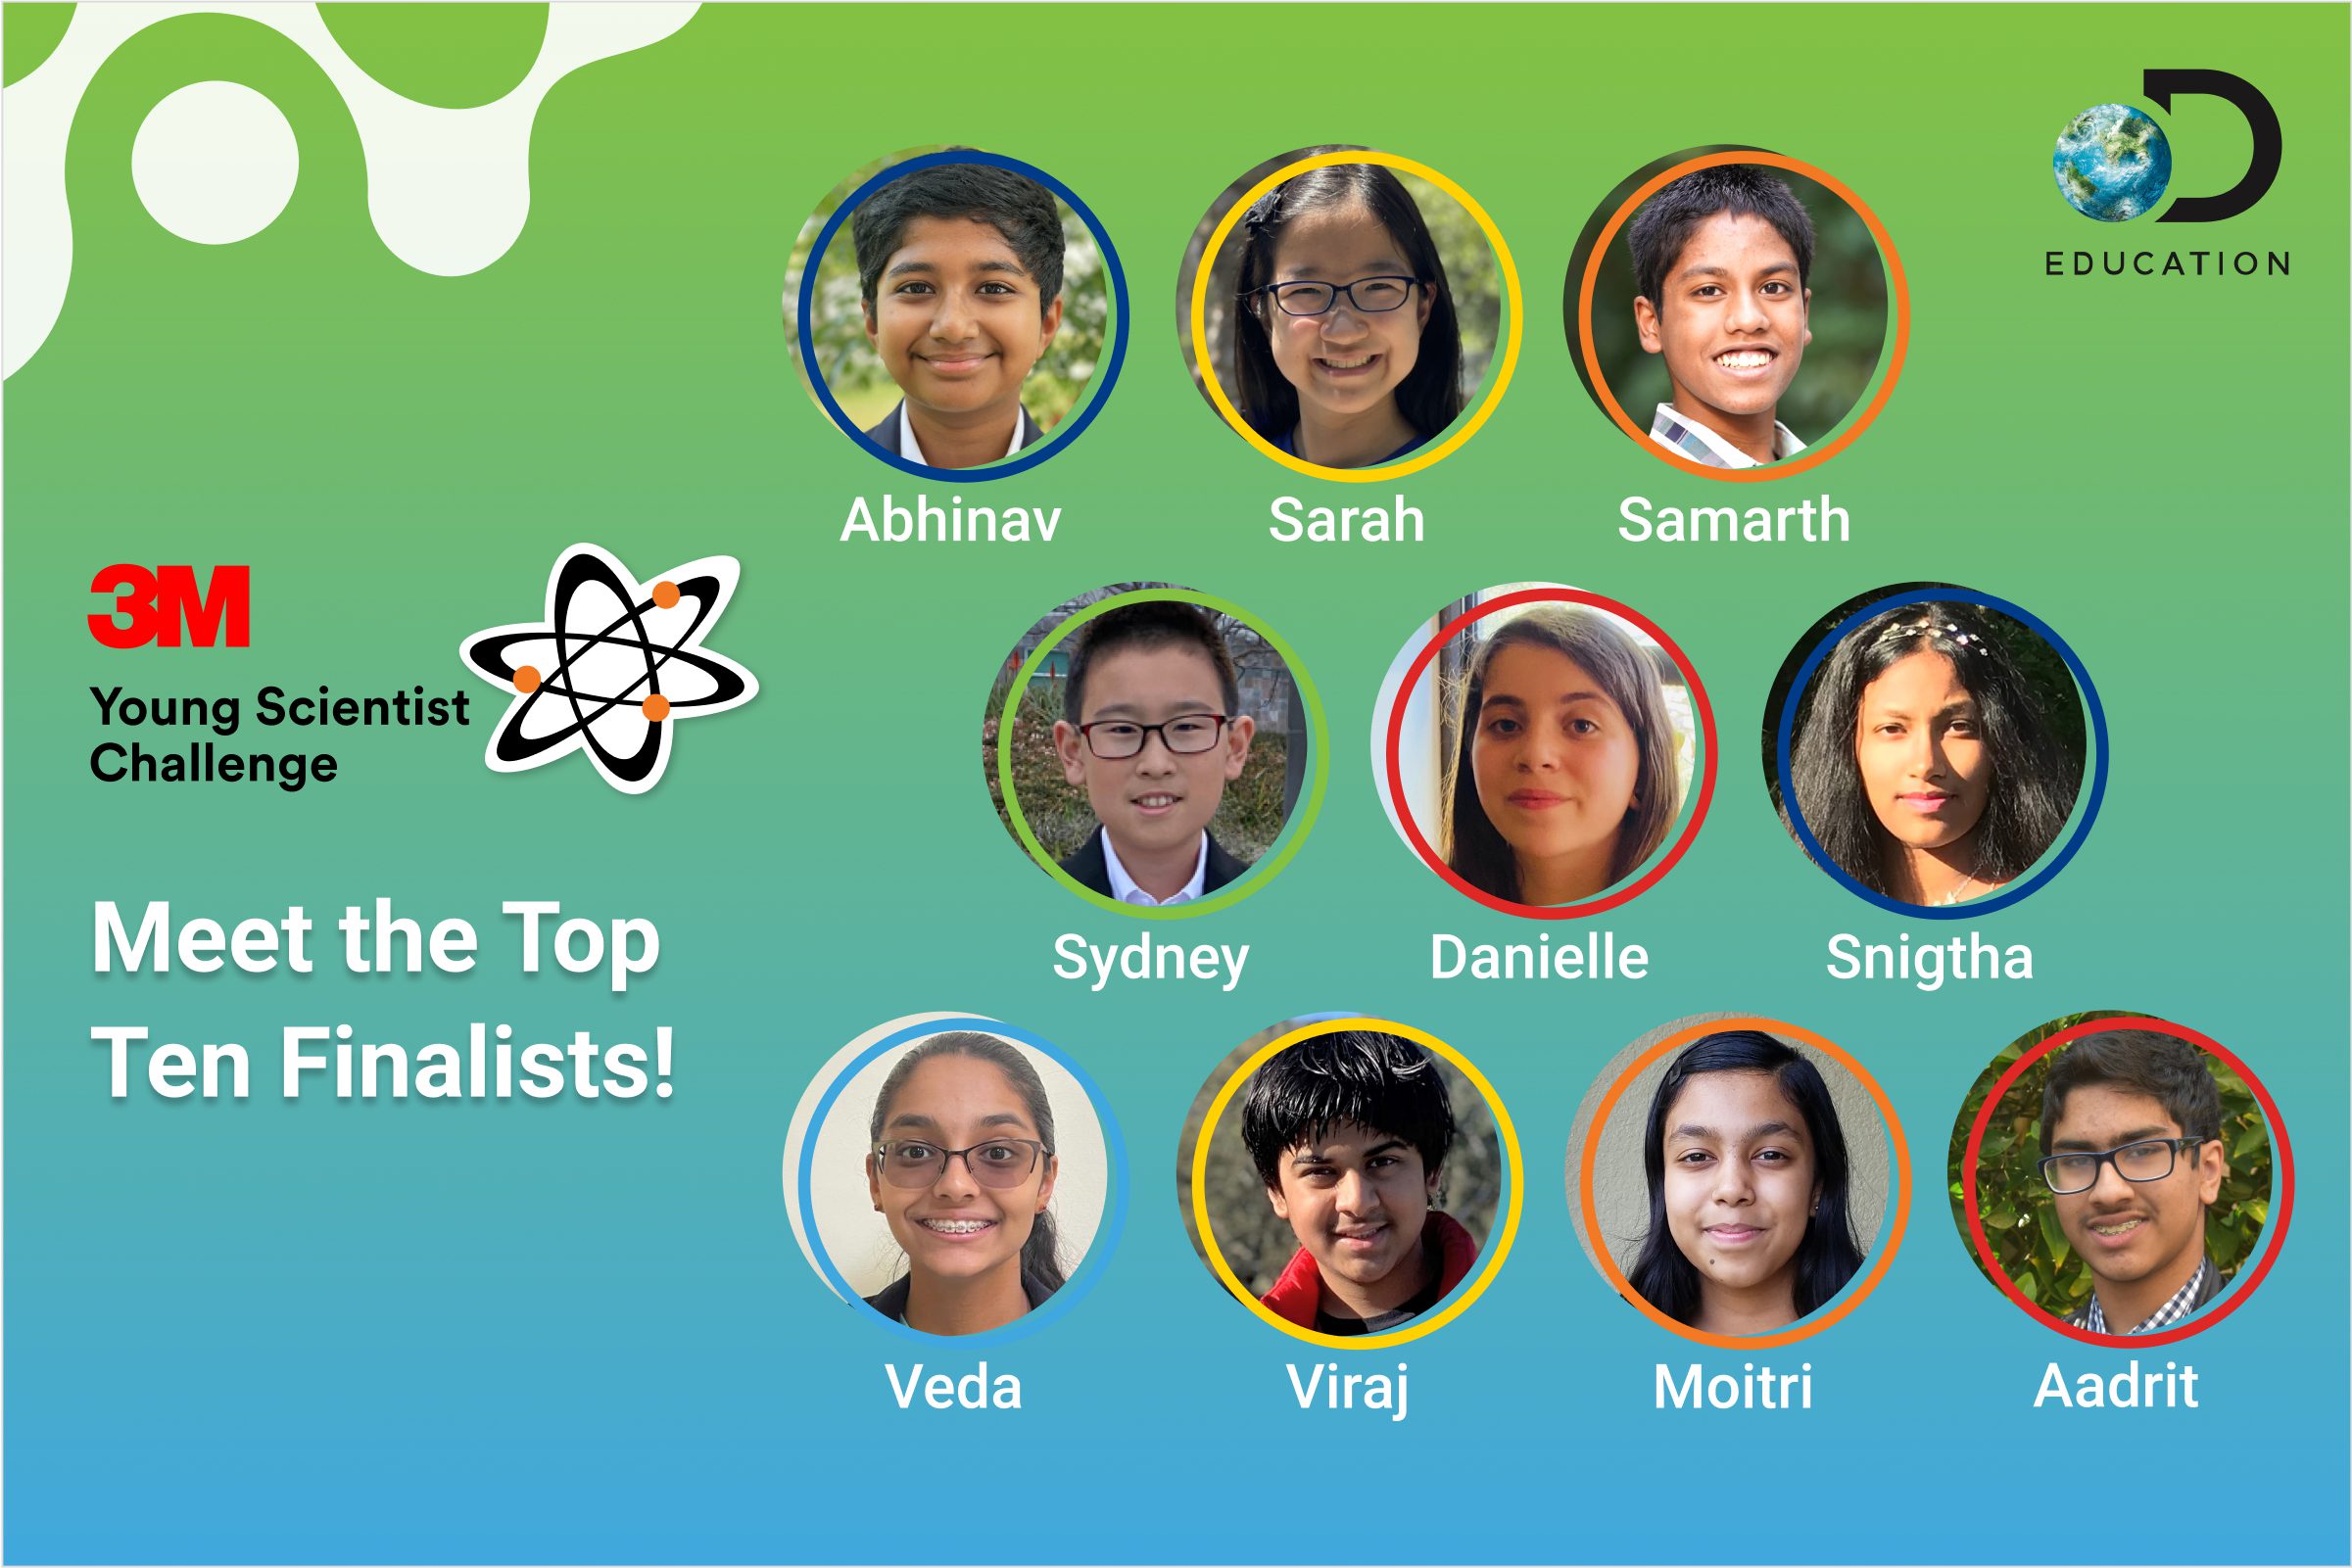 3M Young Scientist Challenge Announces 2021 National Finalists and Honorable Mentions